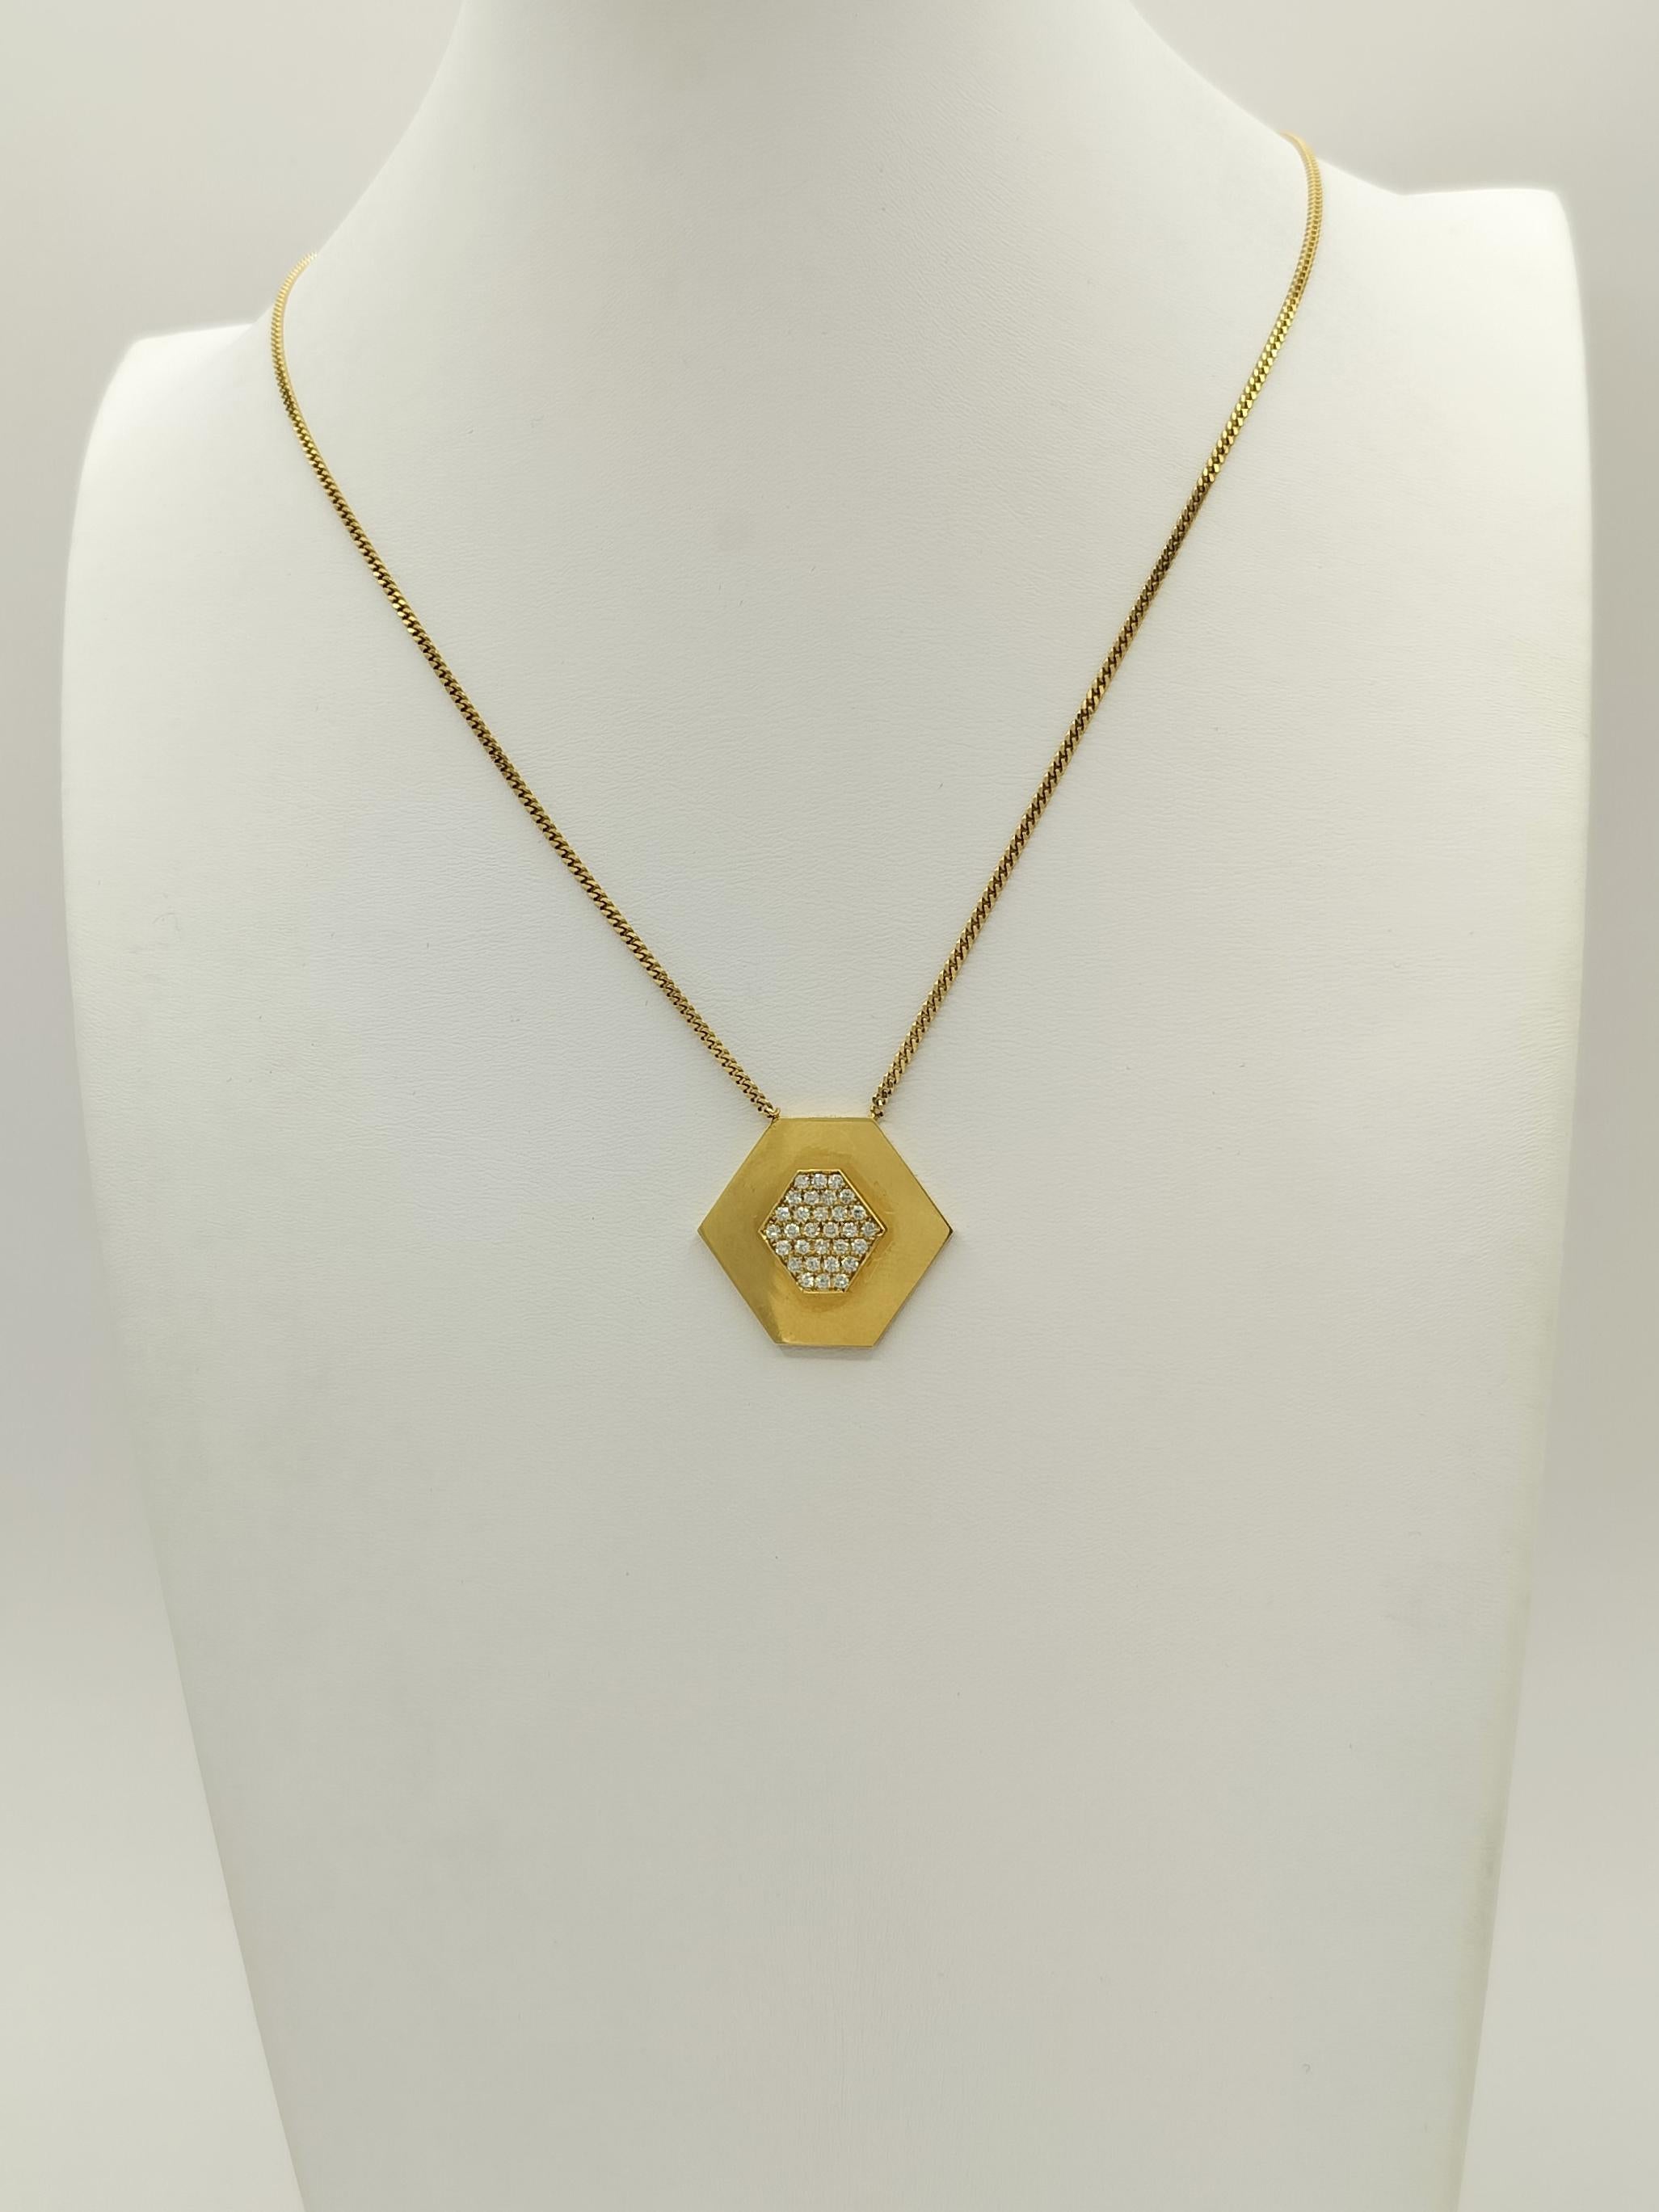 Estate Janis Savitt White Diamond Pendant Necklace in 18K Yellow Gold In Excellent Condition For Sale In Los Angeles, CA